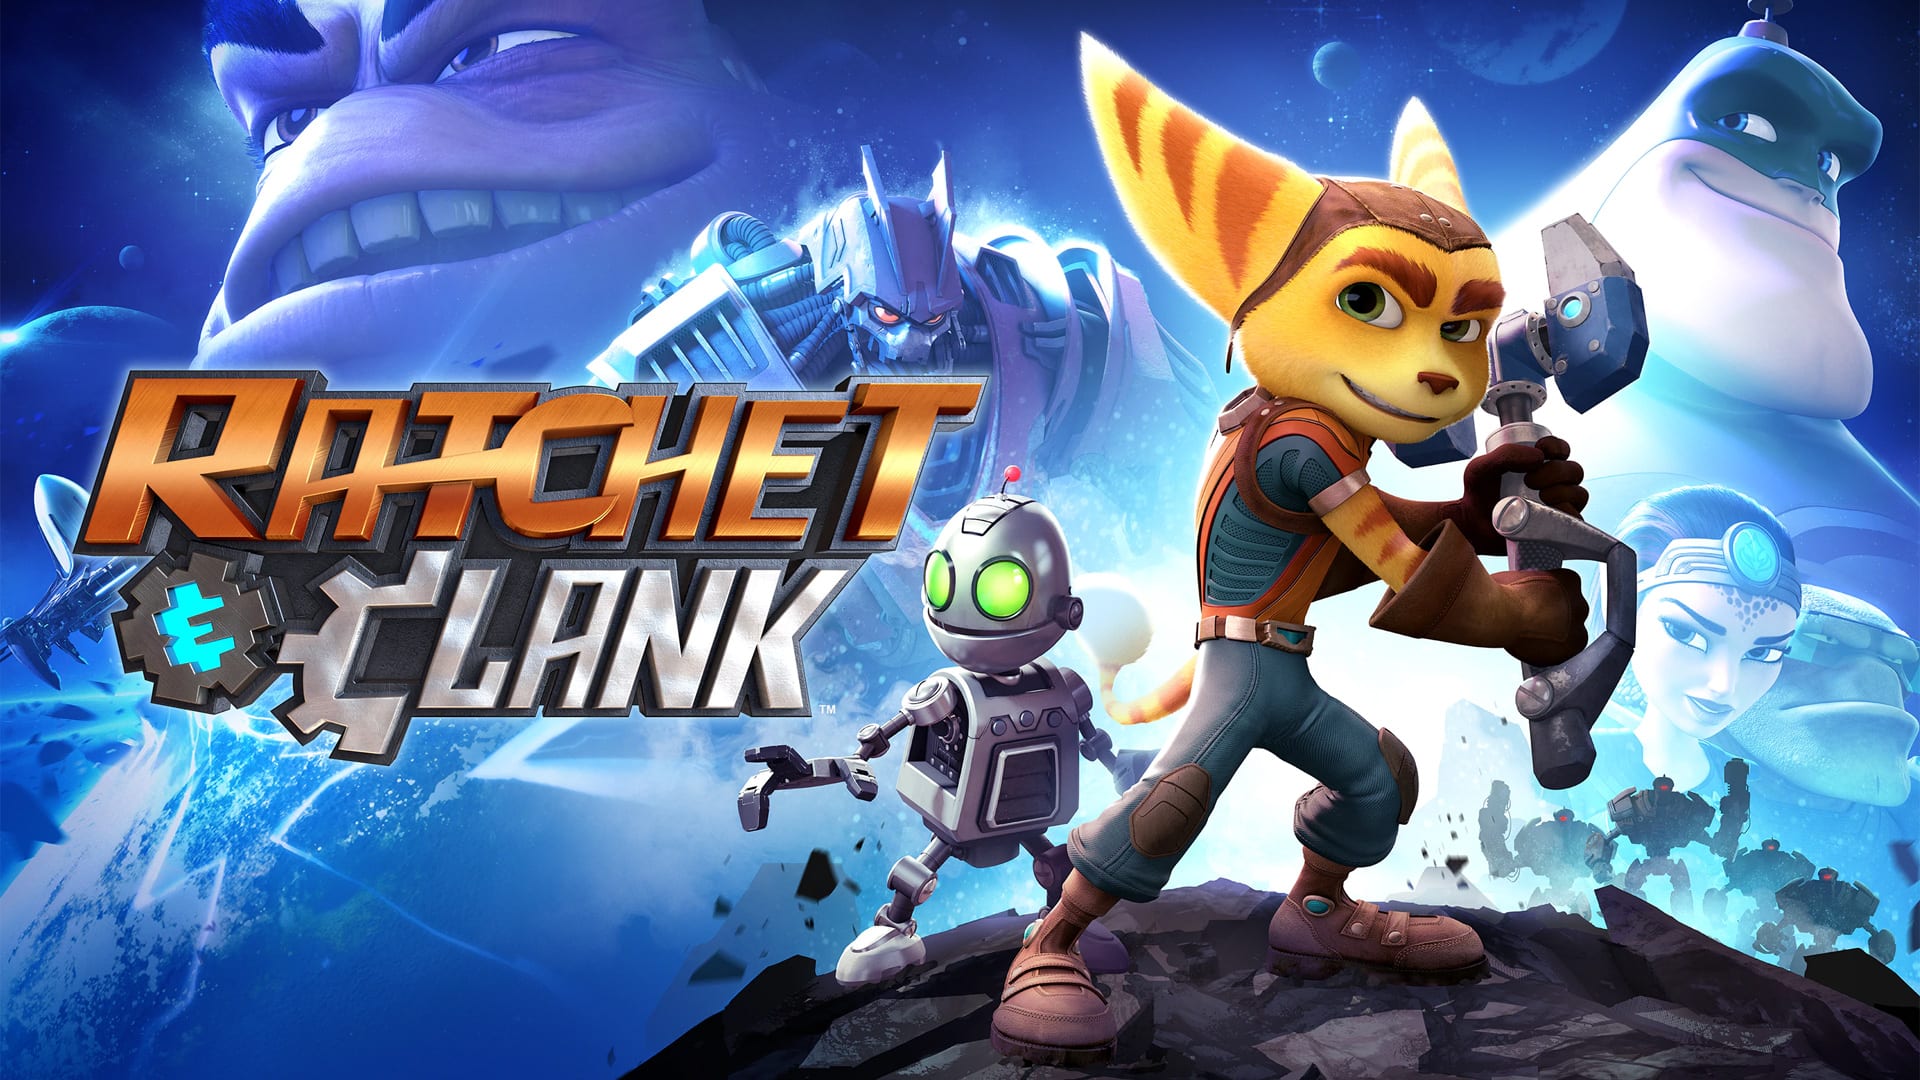 How to Claim Your Own Free Copy of Ratchet & Clank